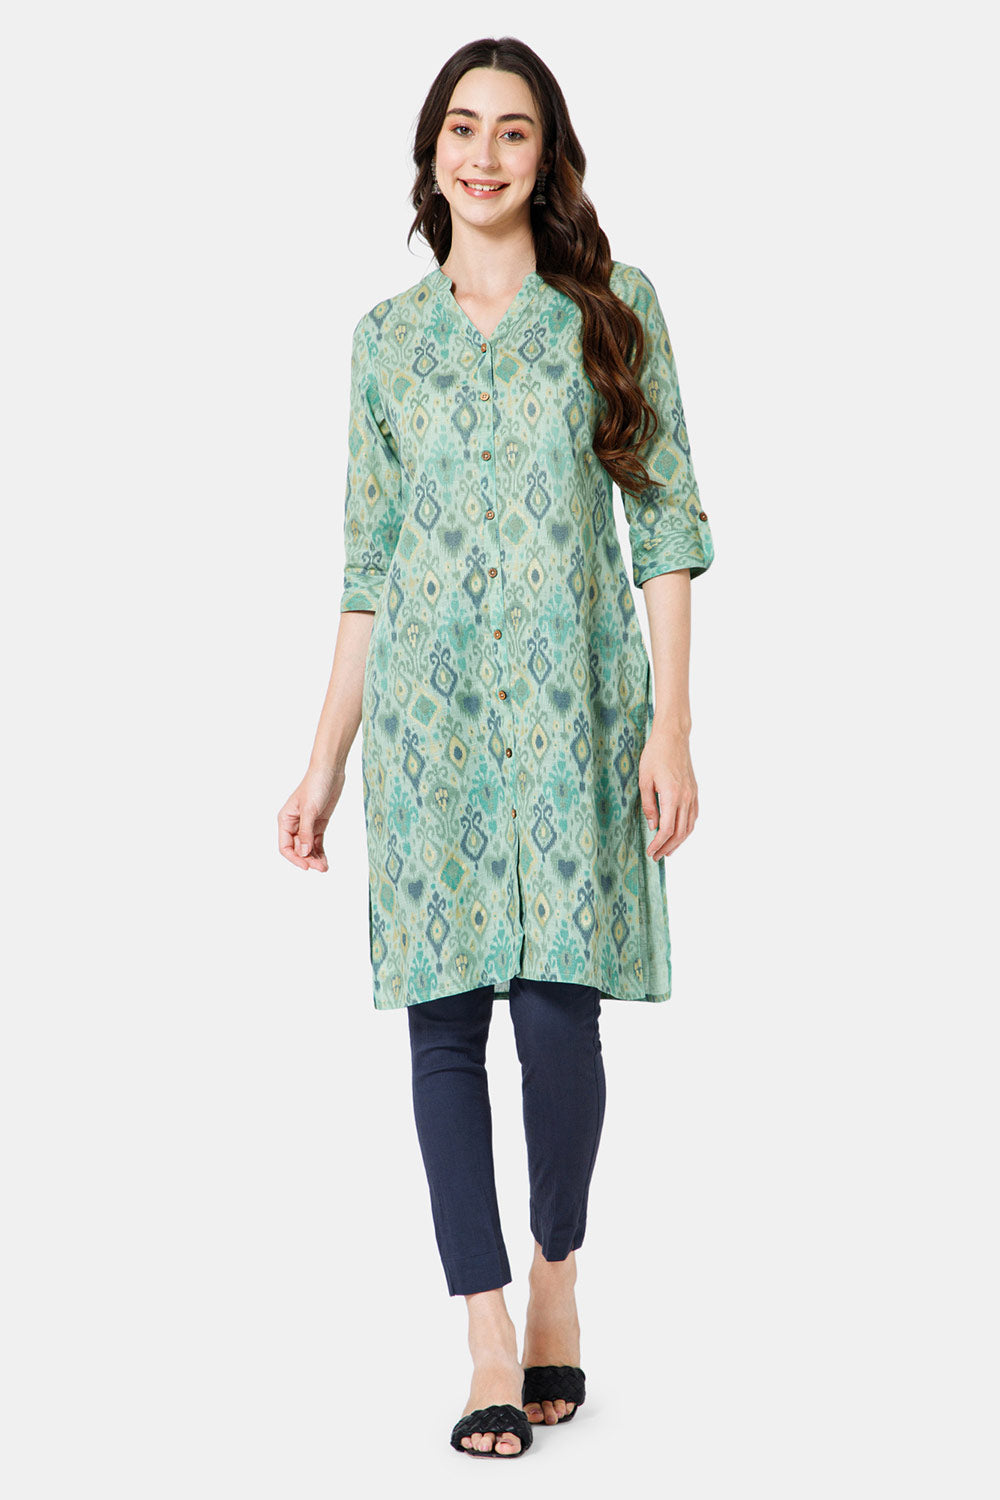 There's acute difference between style and fashion. And that is Quality.  Get Premium Quality kurti only at Feather Touch #feathertouch  #womenchoice... | By Feather TouchFacebook